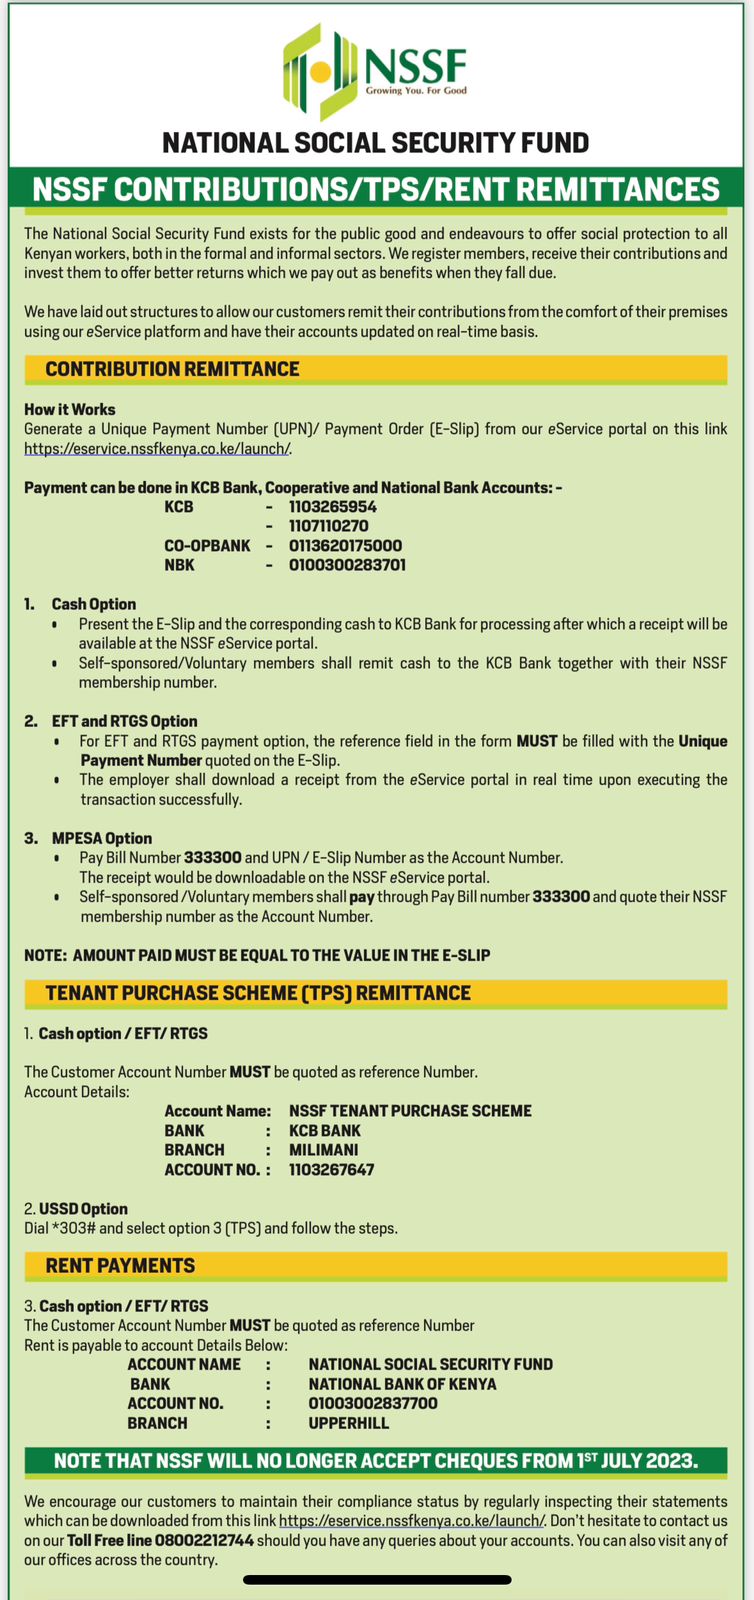 NSSF Contributions/TPS/Rent remittances